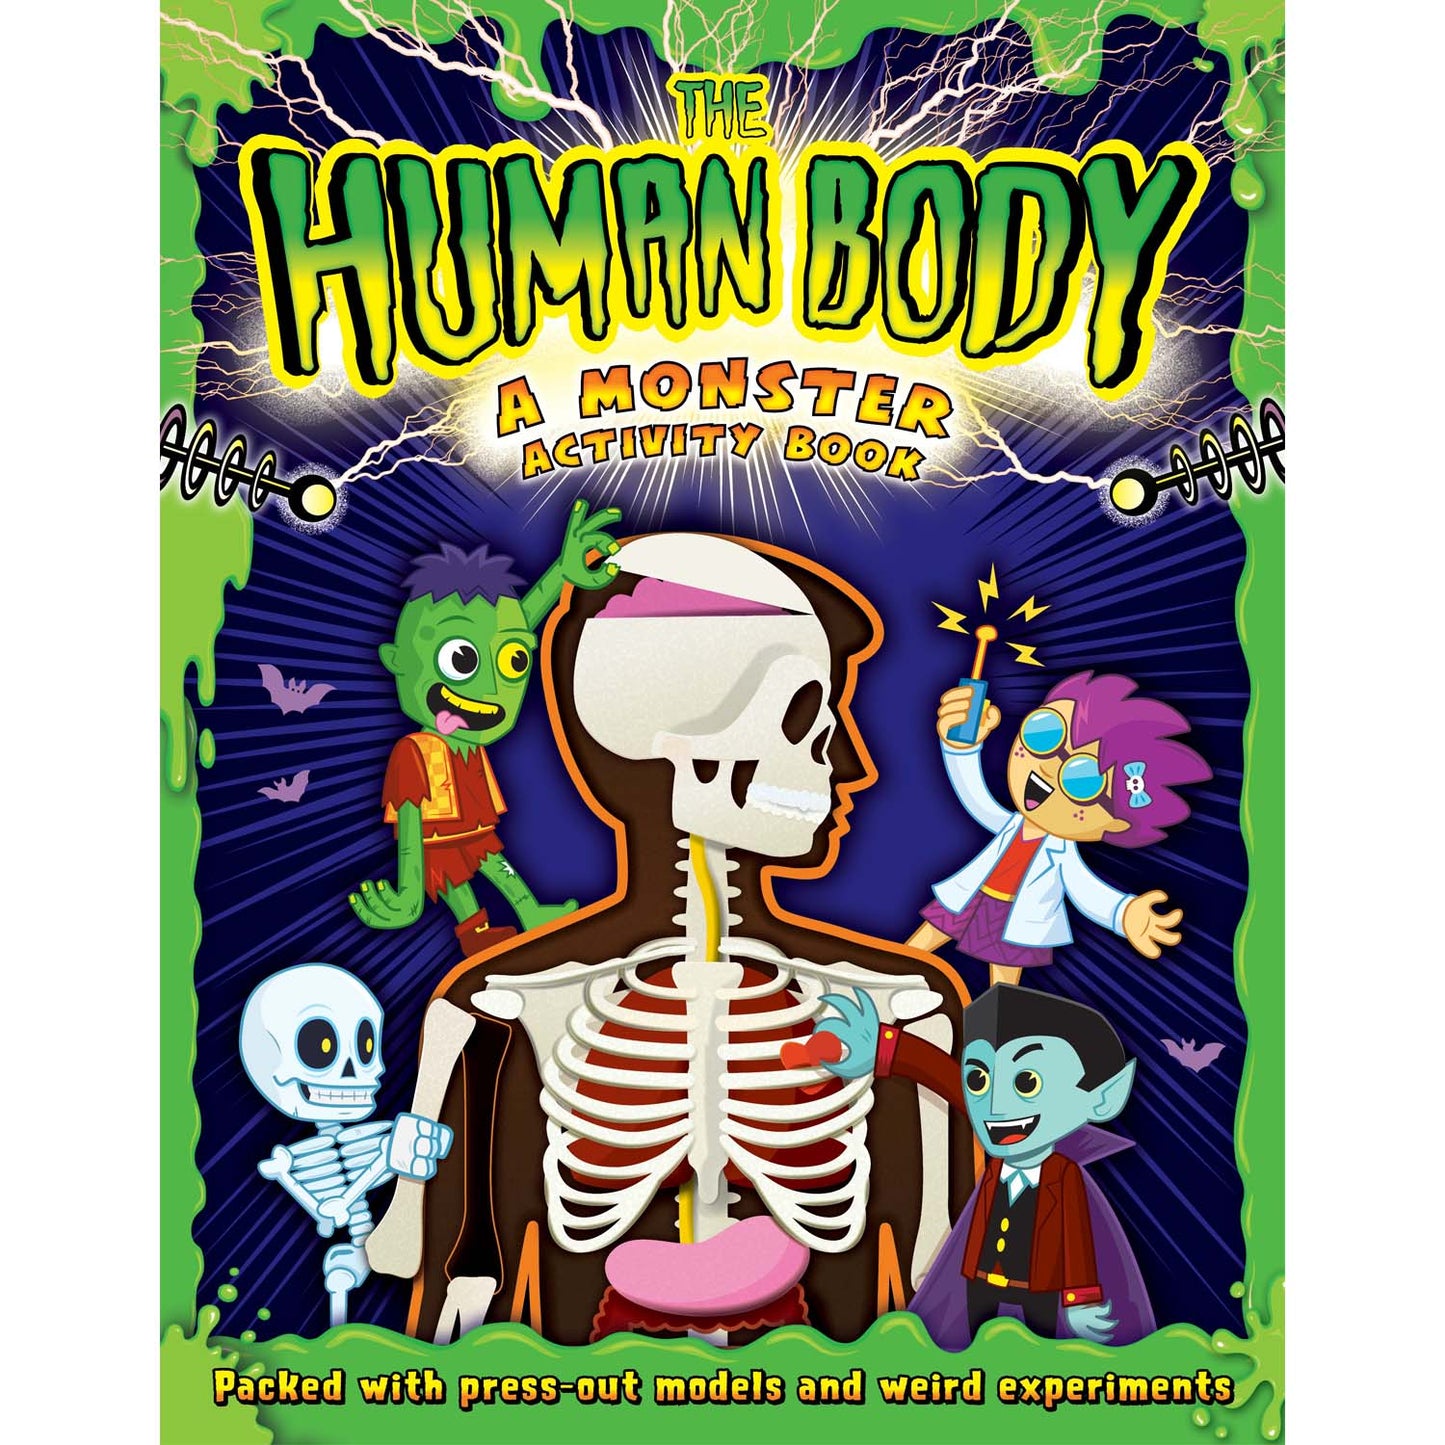 The Human Body - A Monster Activity Book